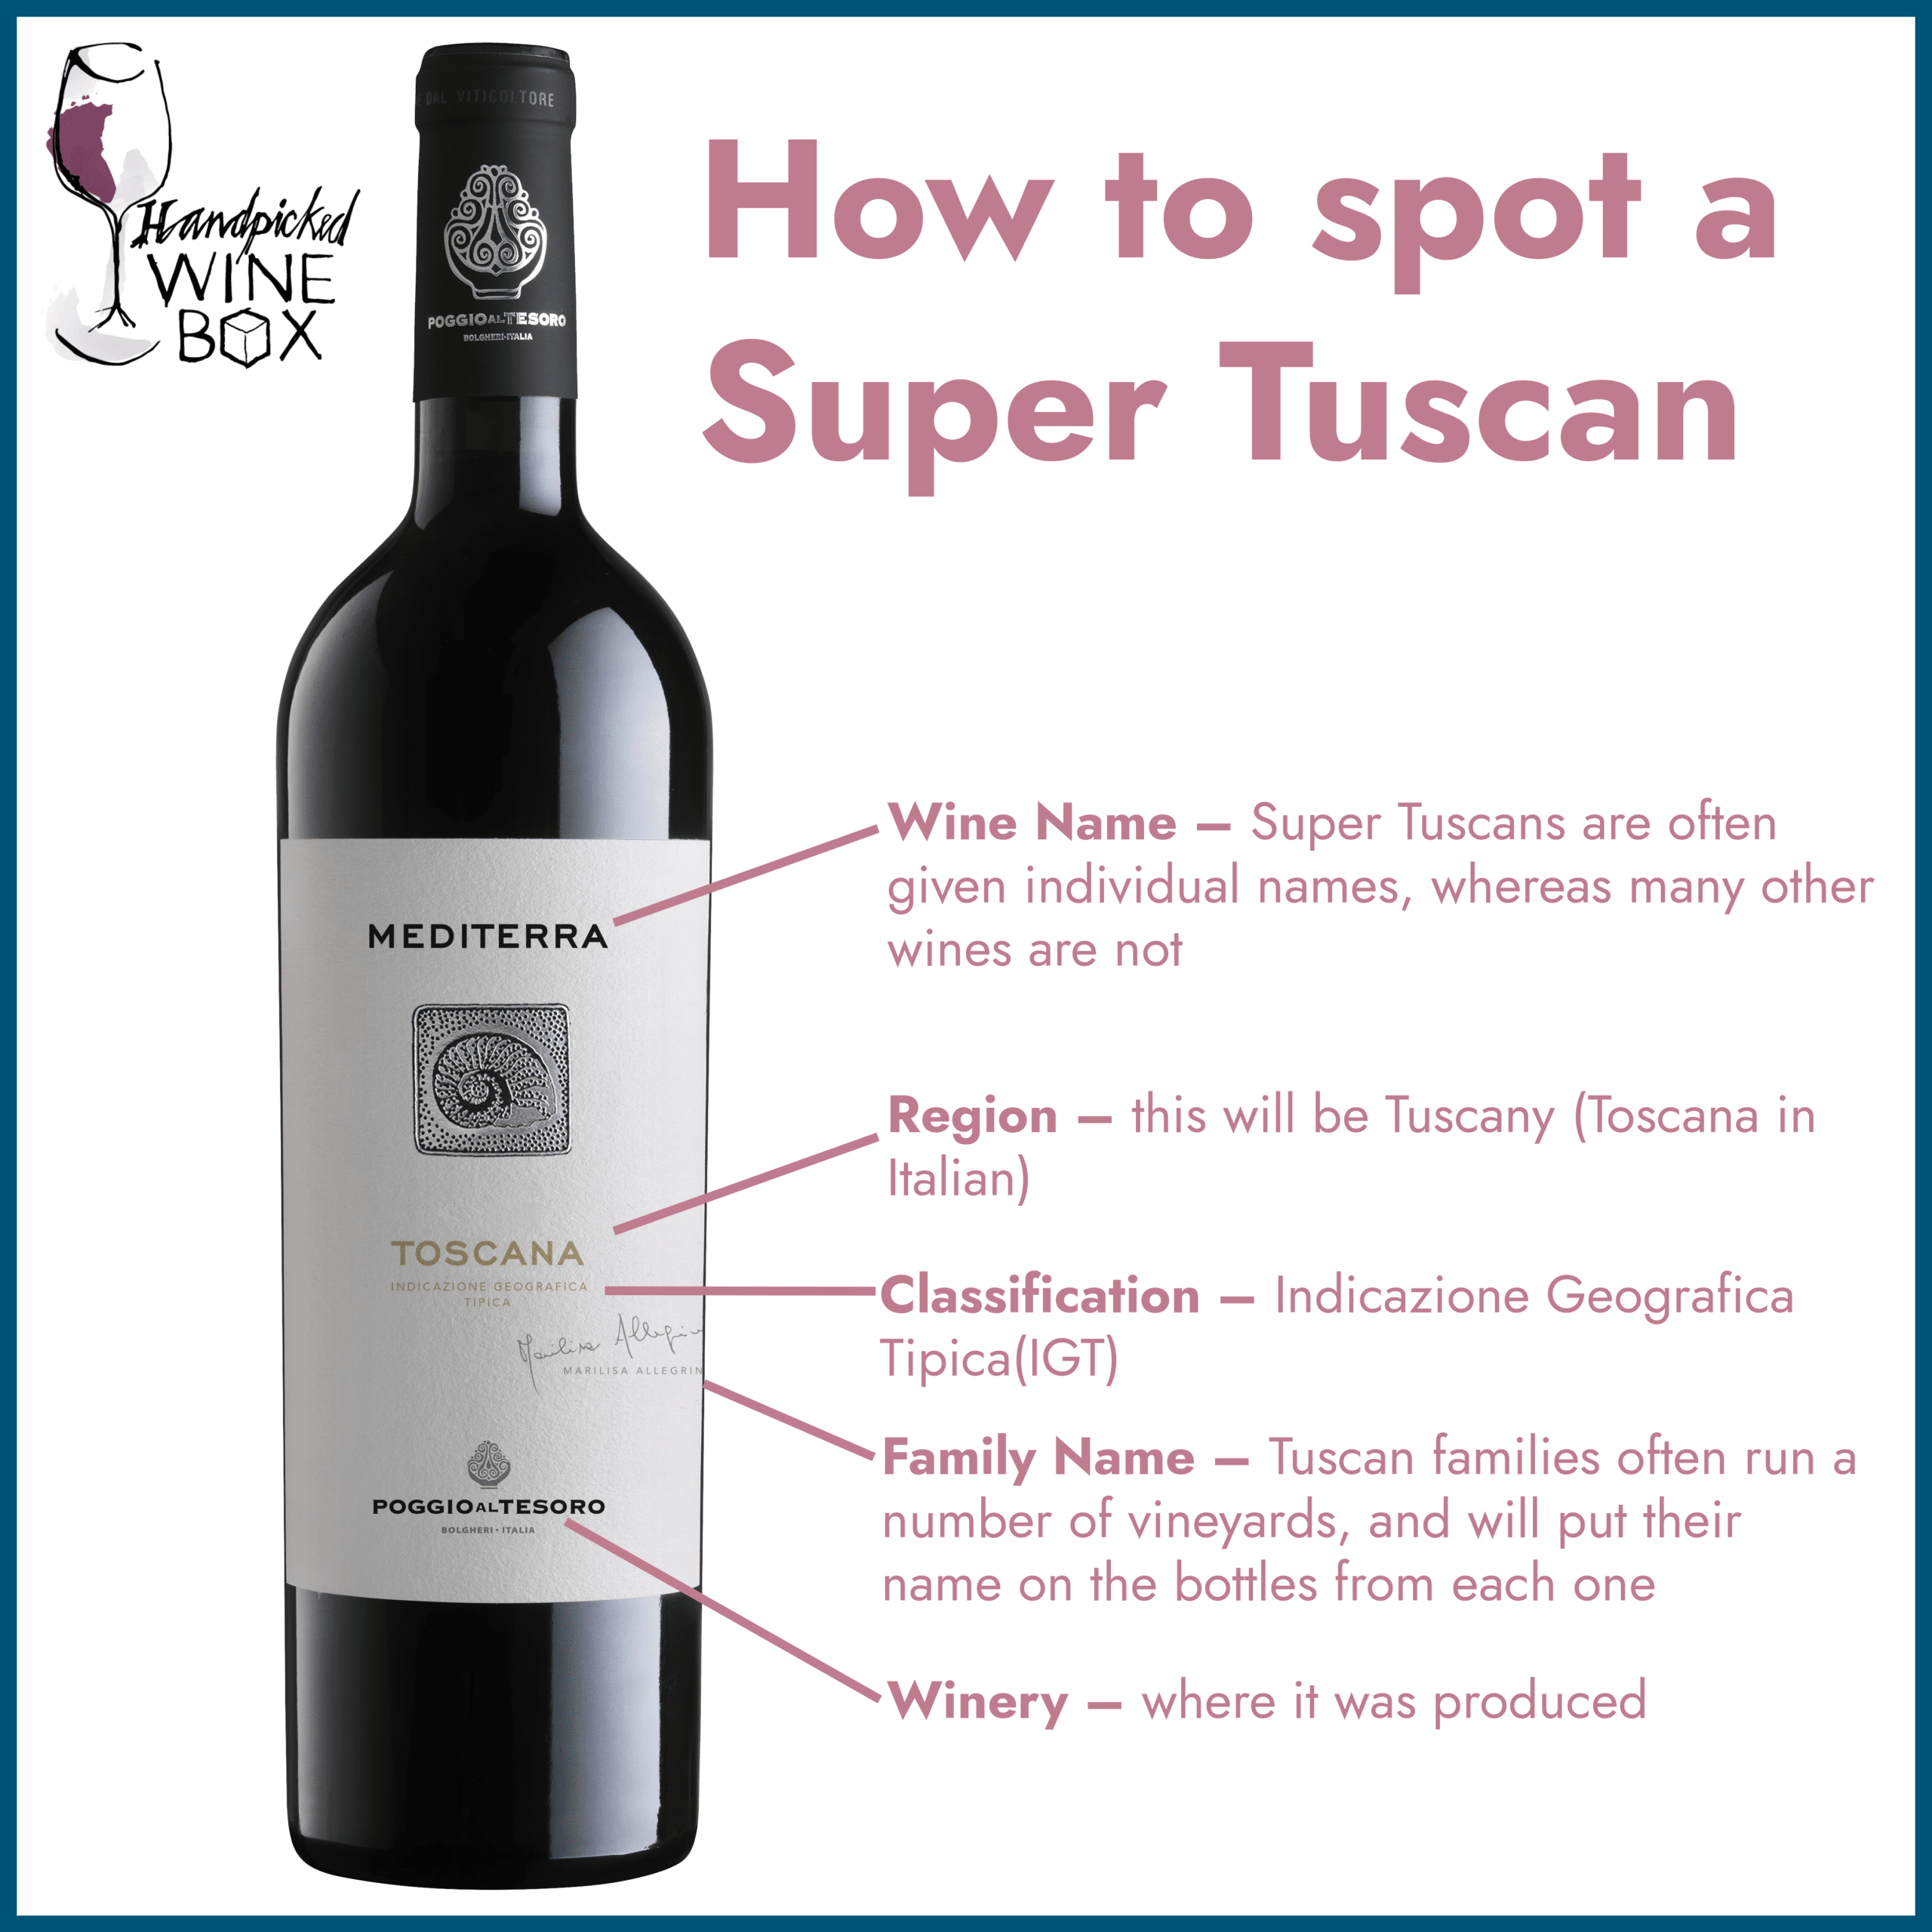 How to Spot a Super Tuscan